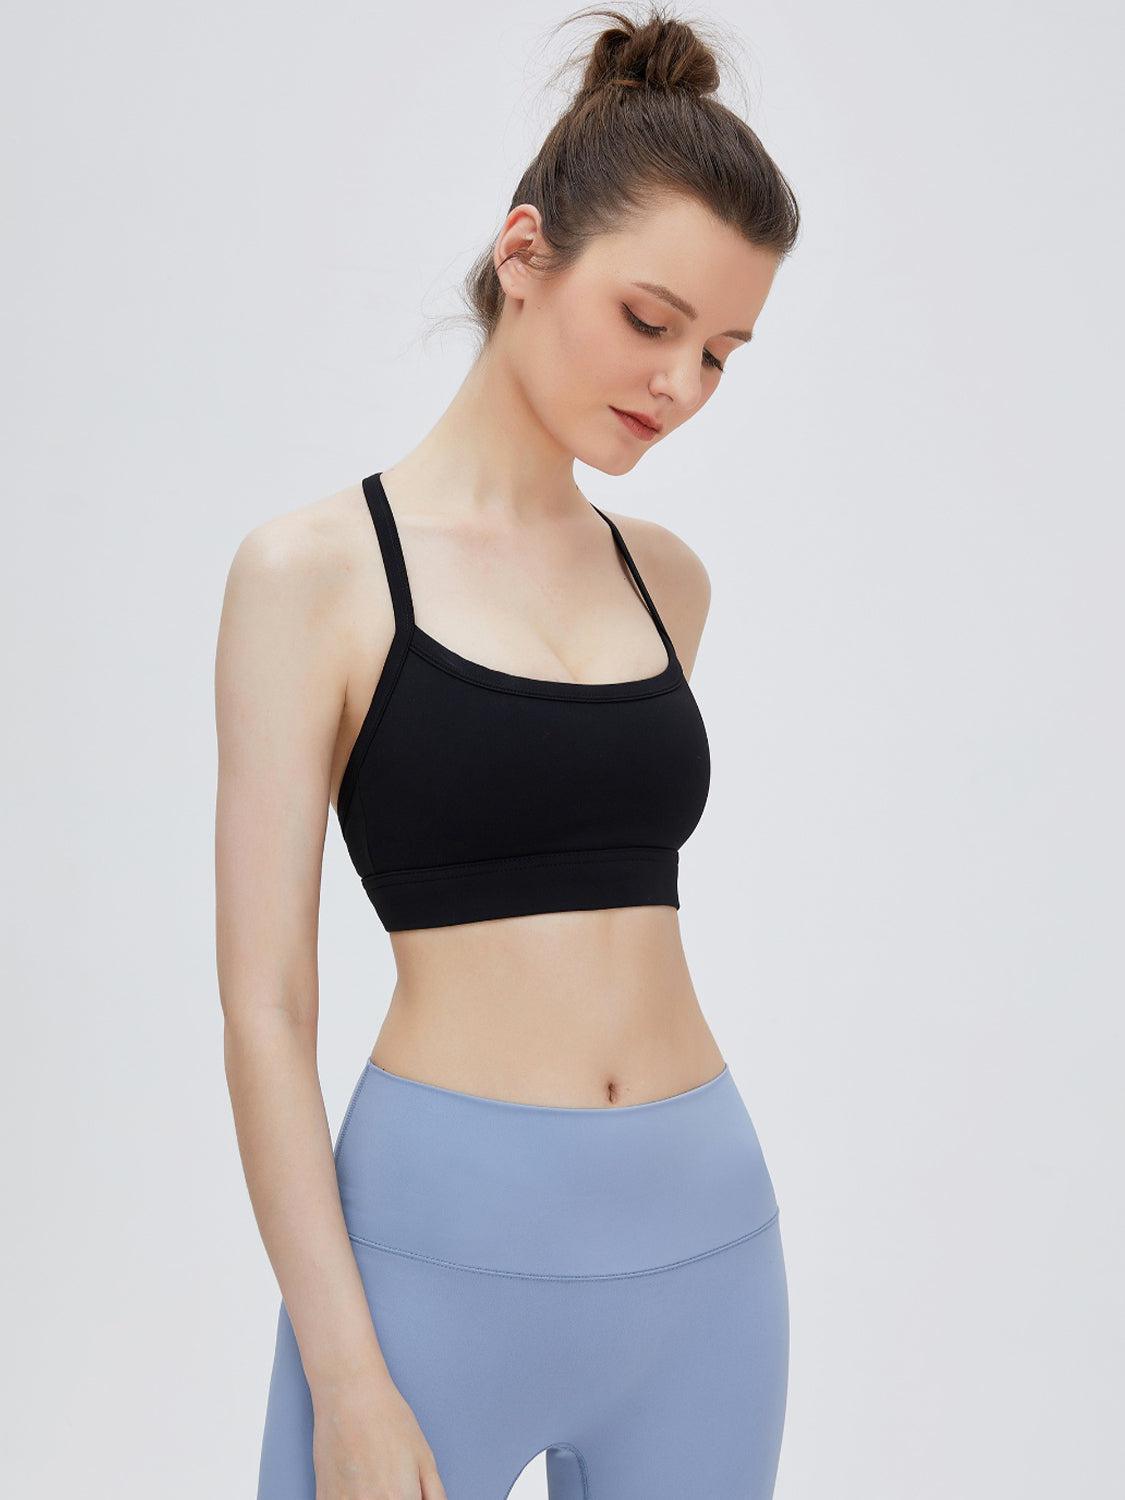 a woman in a black sports bra top and blue leggings